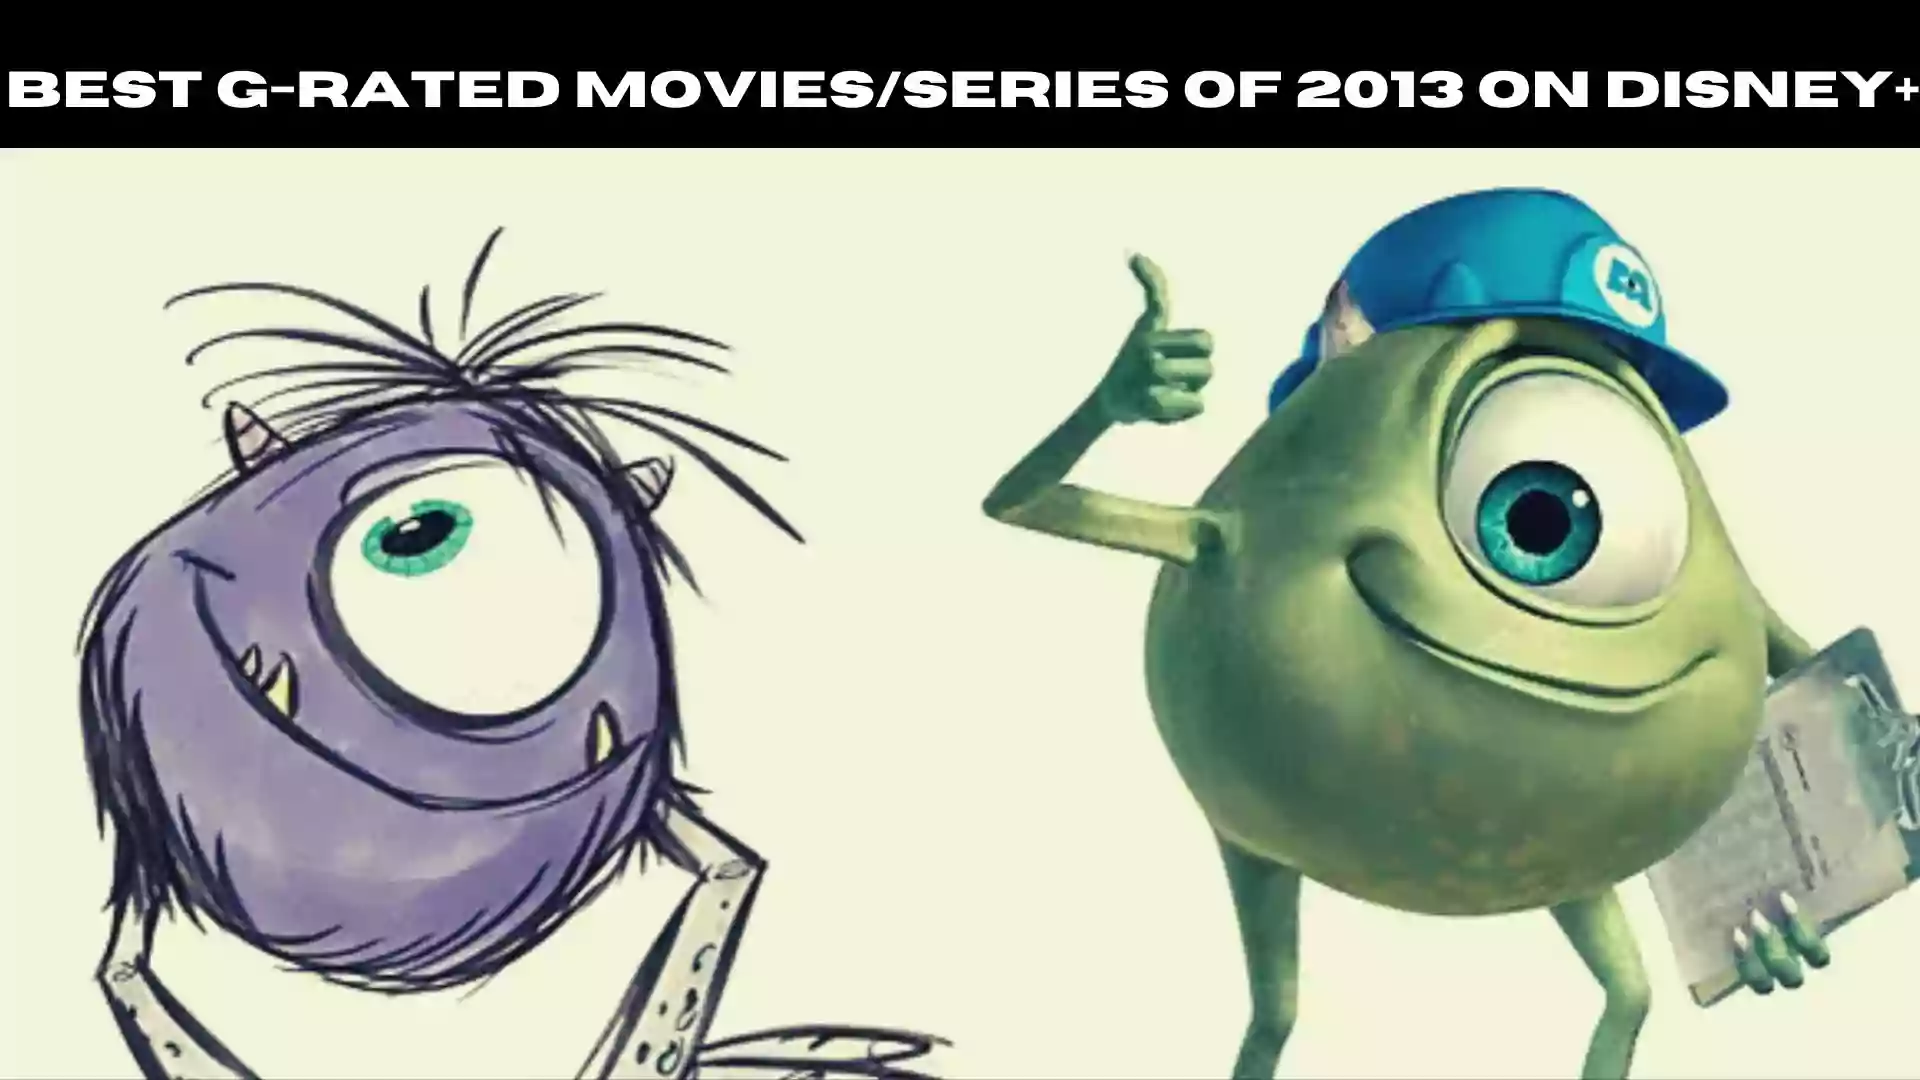 Best G-Rated Movies/series of 2013 on Disney+